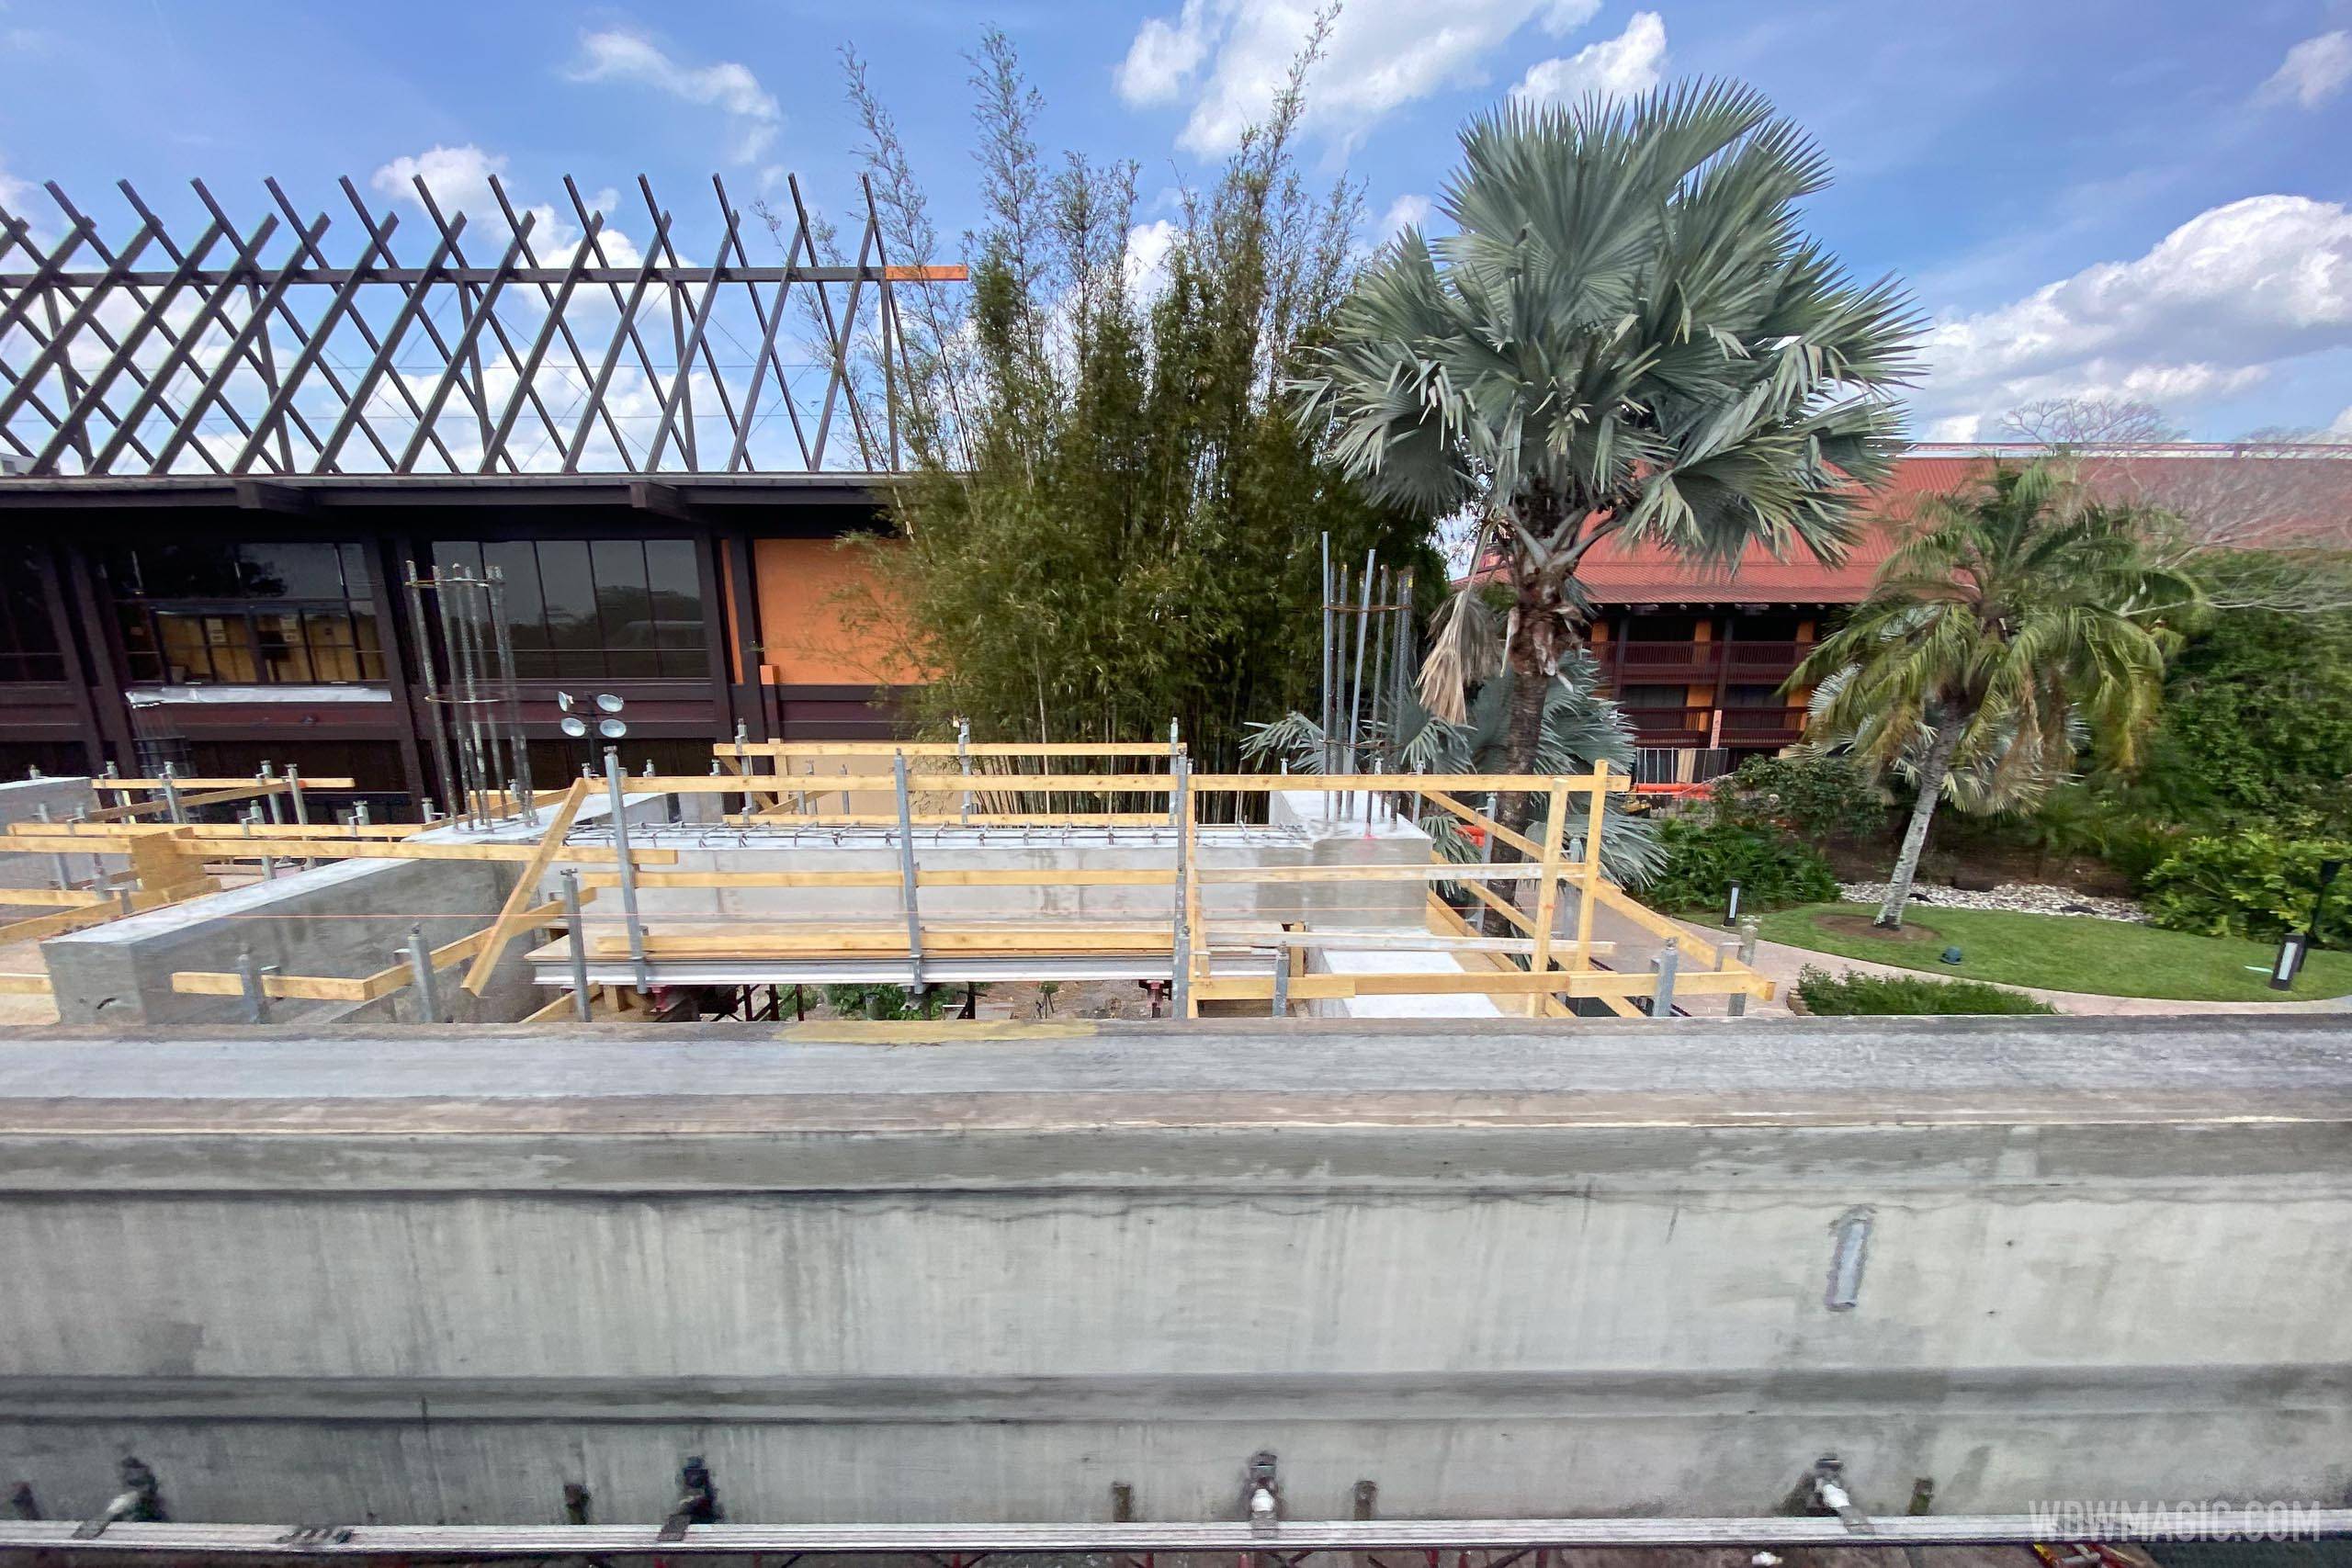 Polynesian Village Resort monorail station construction - March 22 2021